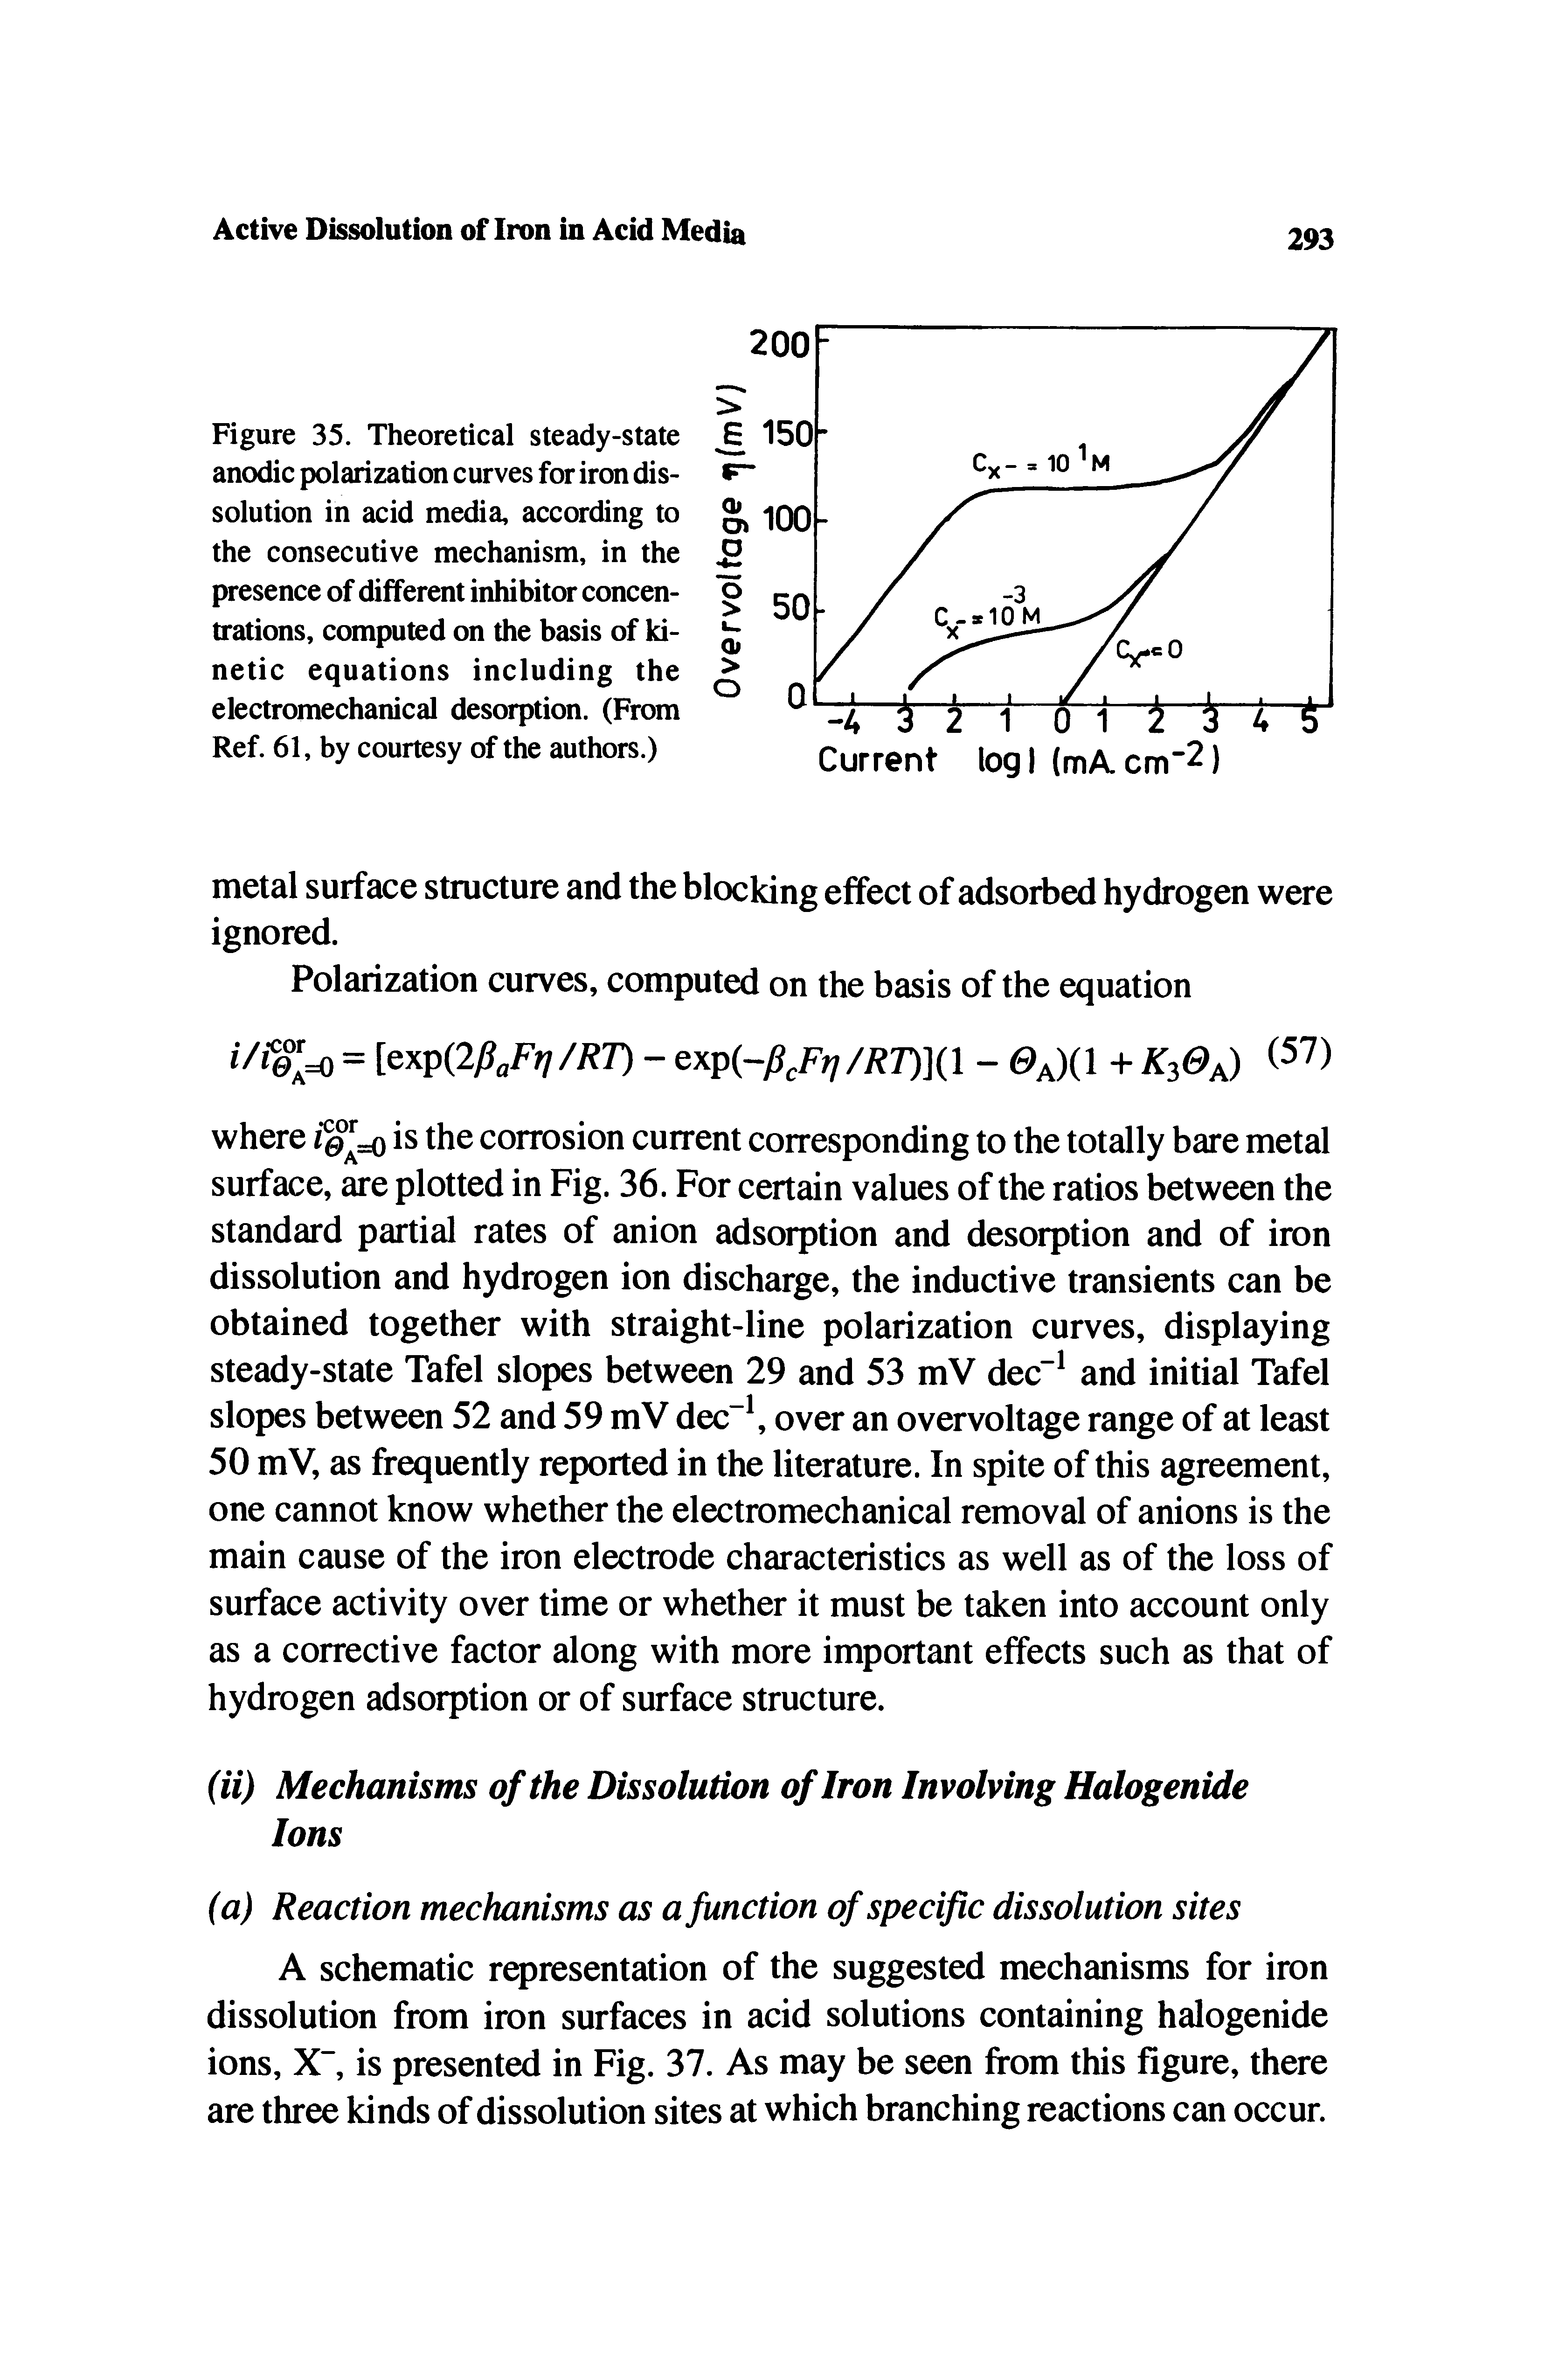 Figure 35. Theoretical steady-state anodic polarization curves for iron dissolution in acid media, according to the consecutive mechanism, in the presence of different inhibitor concentrations, computed on the basis of ki-netic equations including the electromechanical desorption. (From Ref. 61, by courtesy of the authors.)...